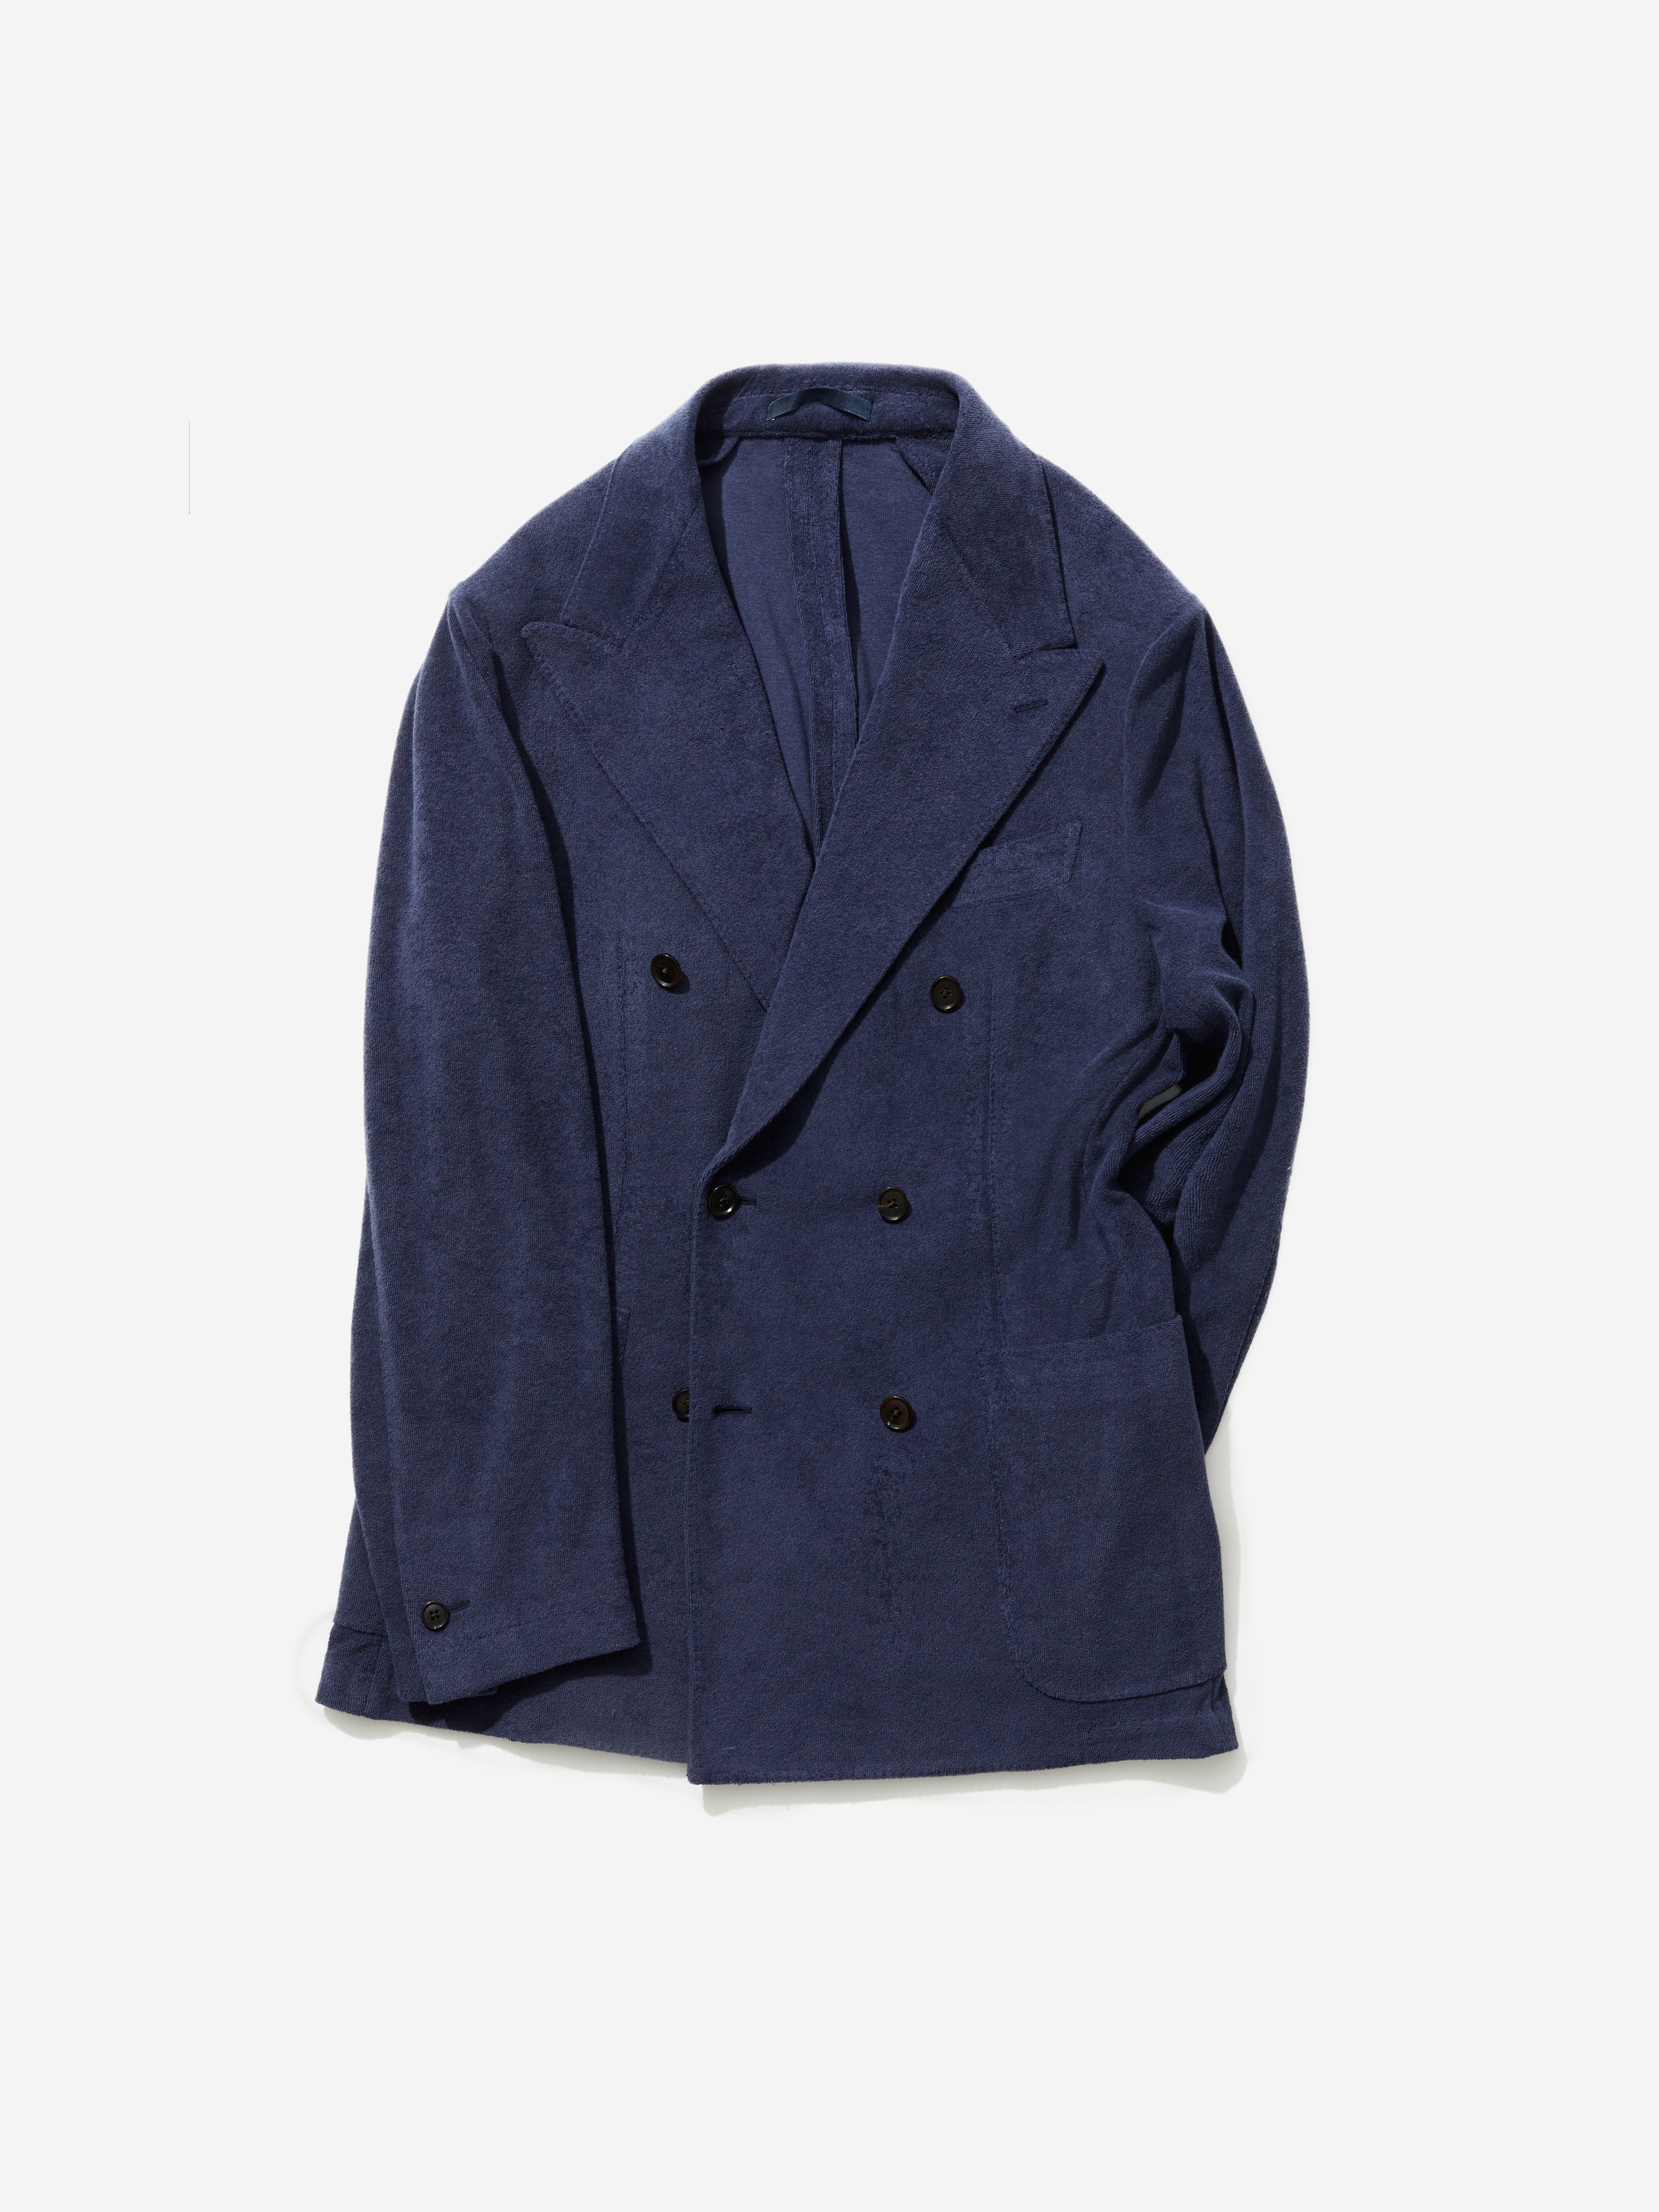 Navy Terry Towelling Jacket - Grand Le Mar